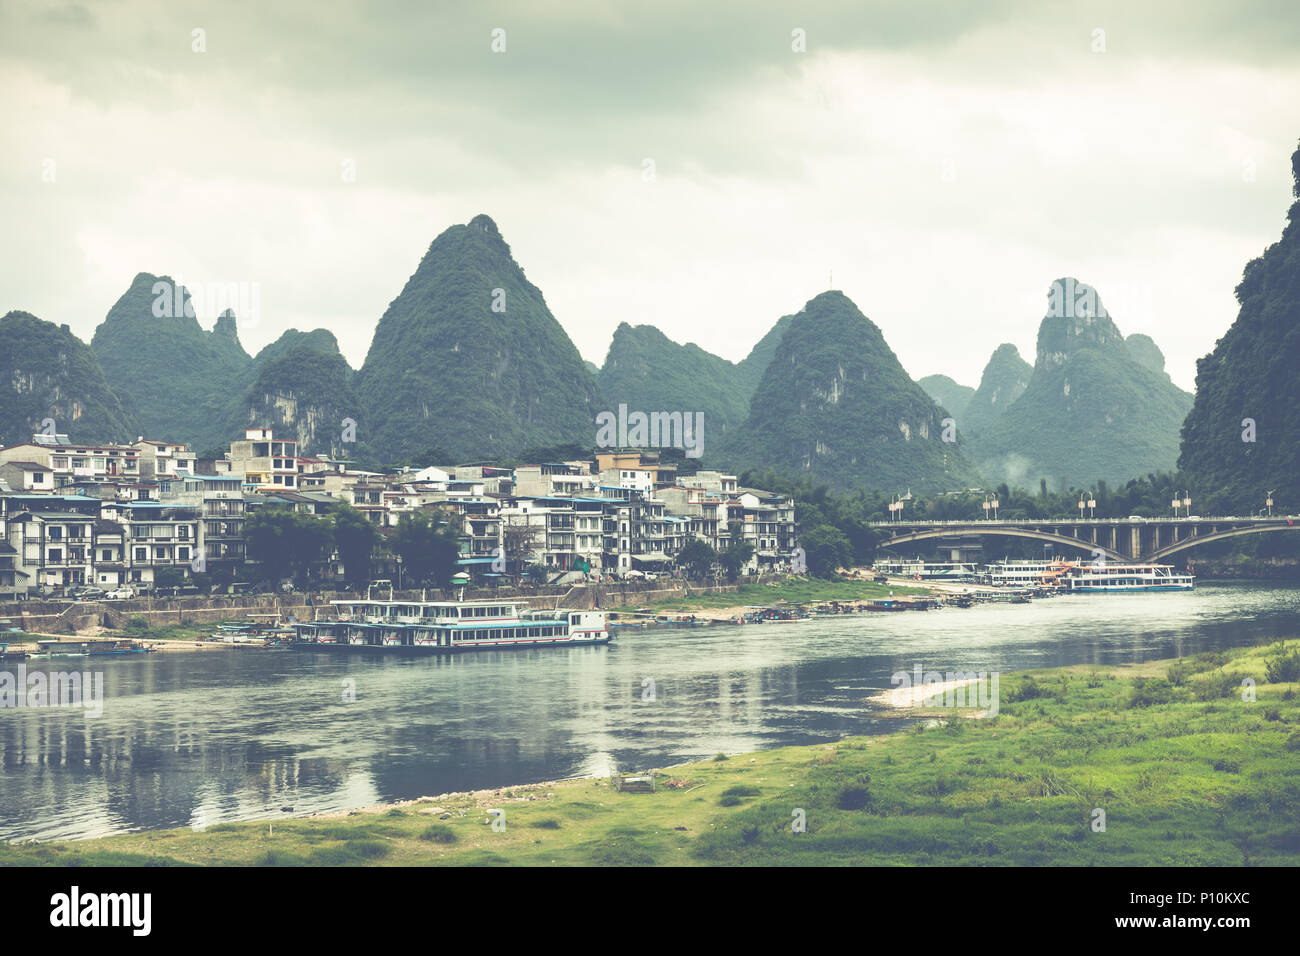 Scenic summer sunny landscape at Yangshuo County of Guilin, China. View of beautiful karst mountains and the Li River (Lijiang River) with azure water Stock Photo